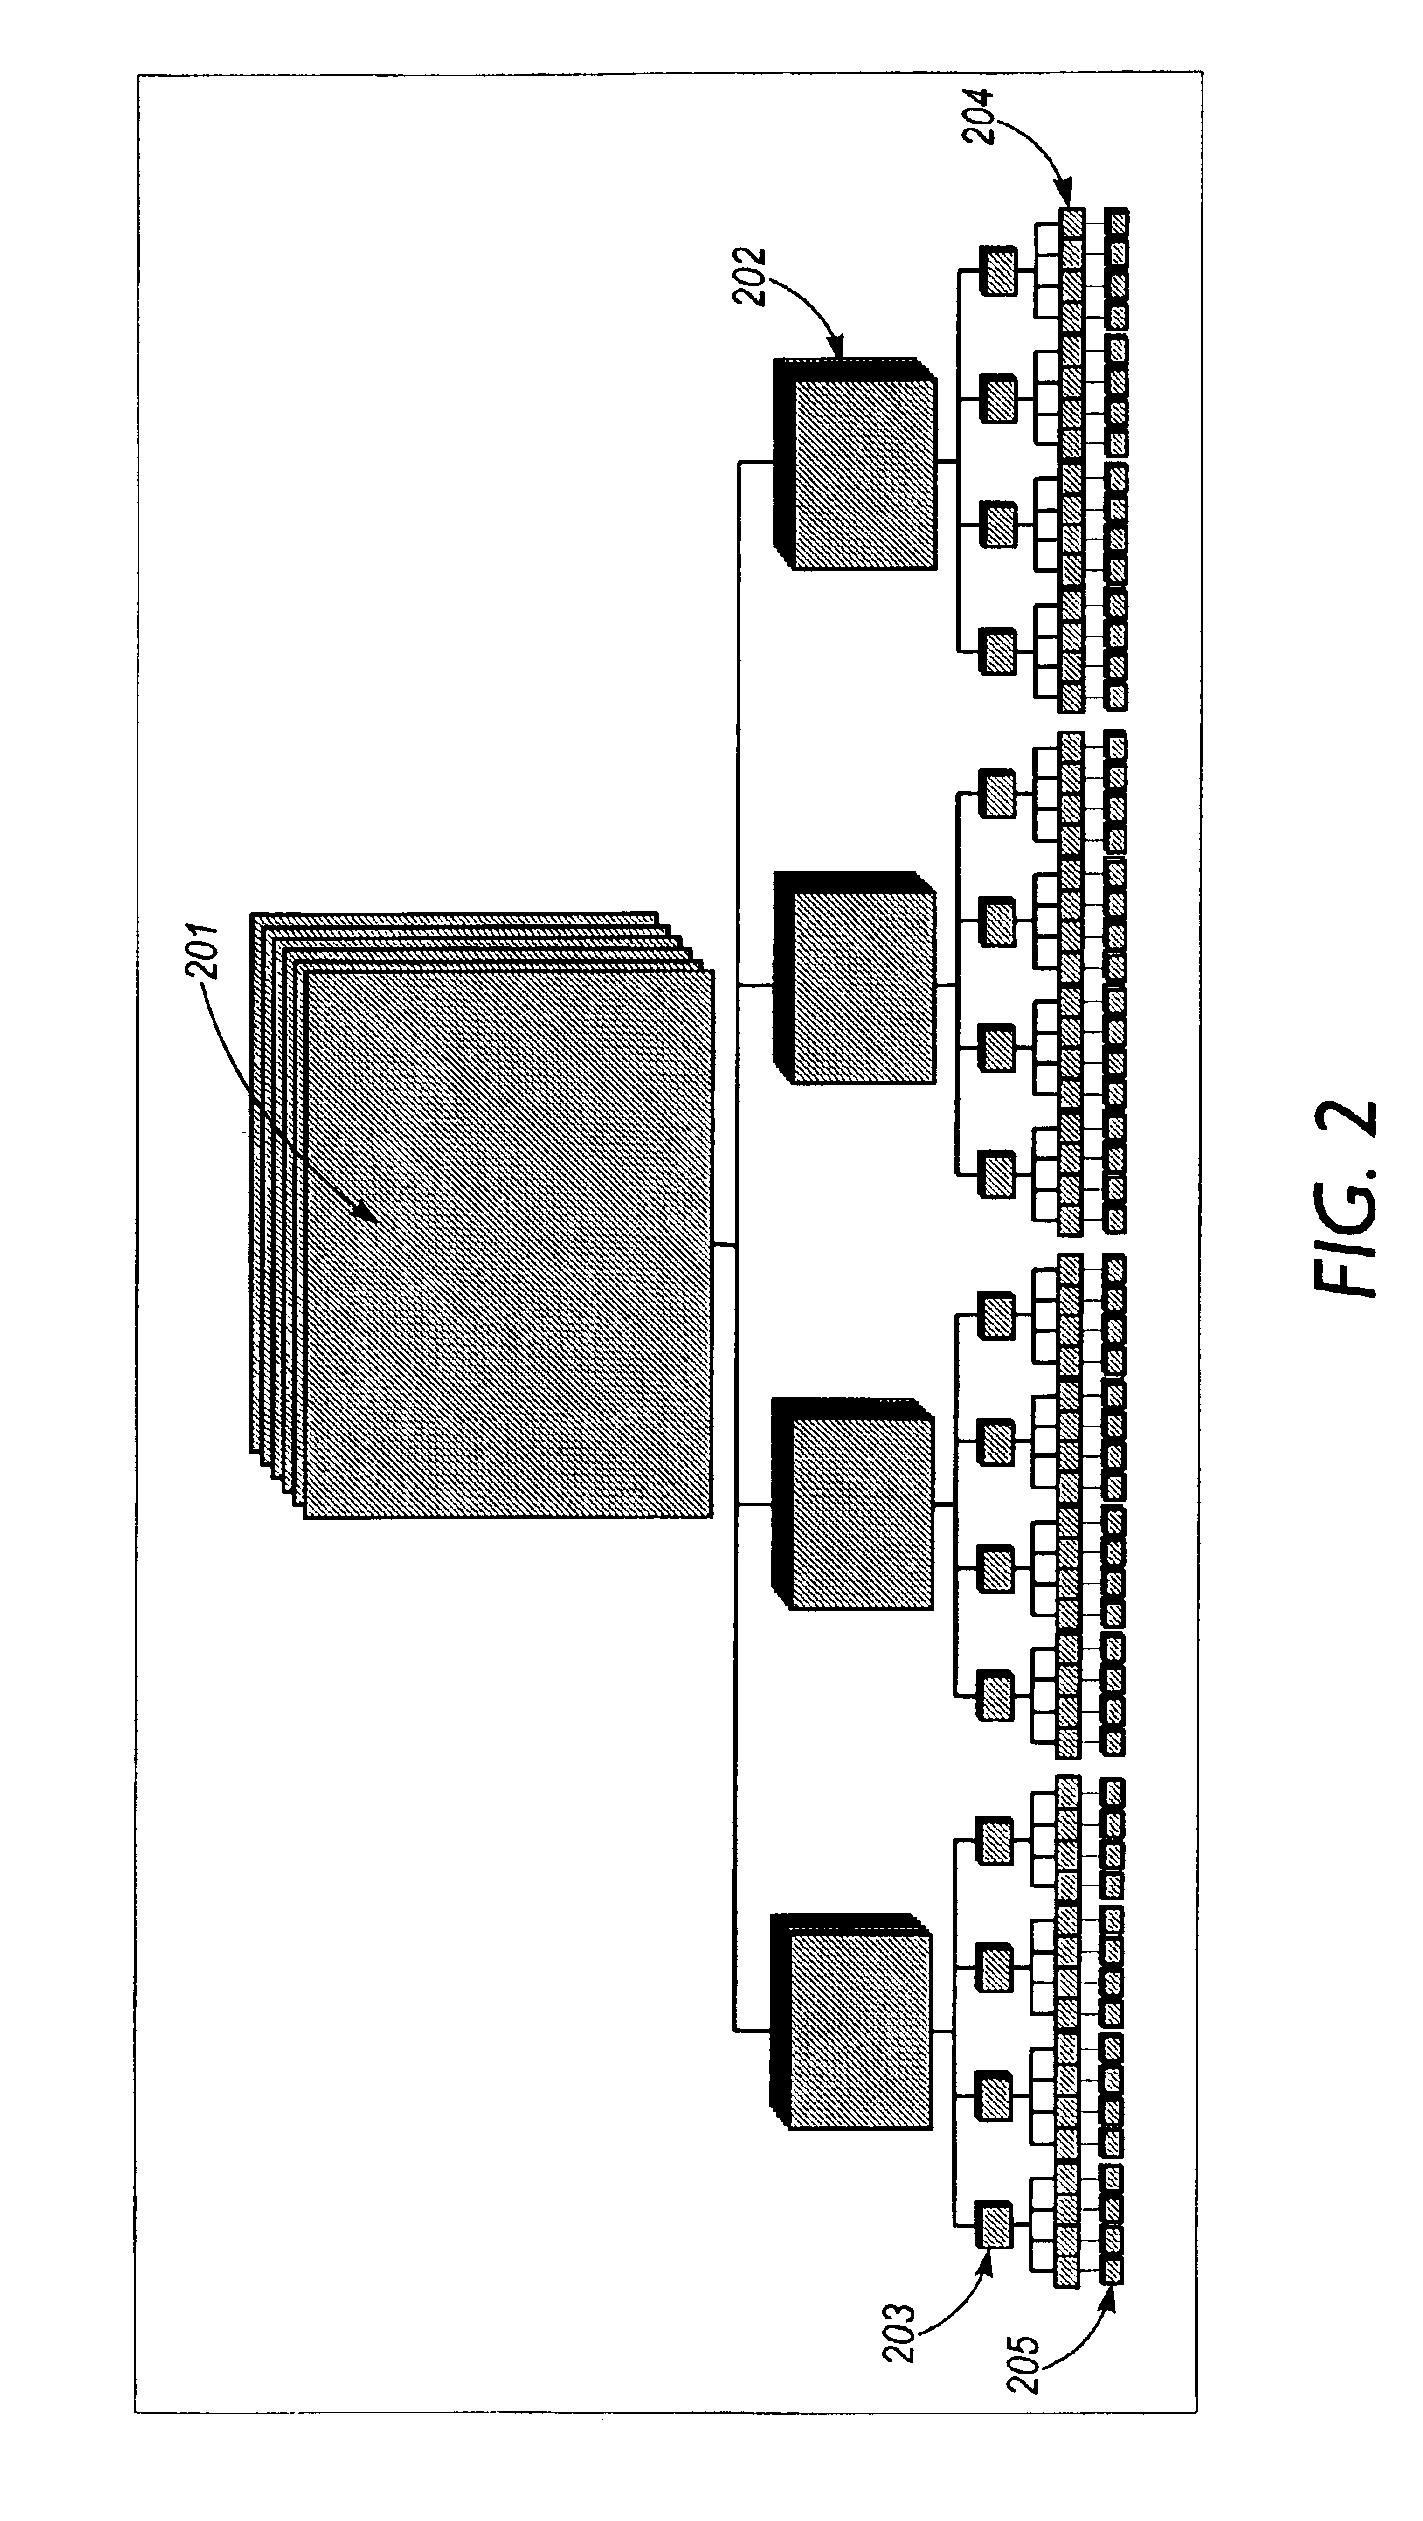 System and method for browsing hierarchically based node-link structures based on an estimated degree of interest